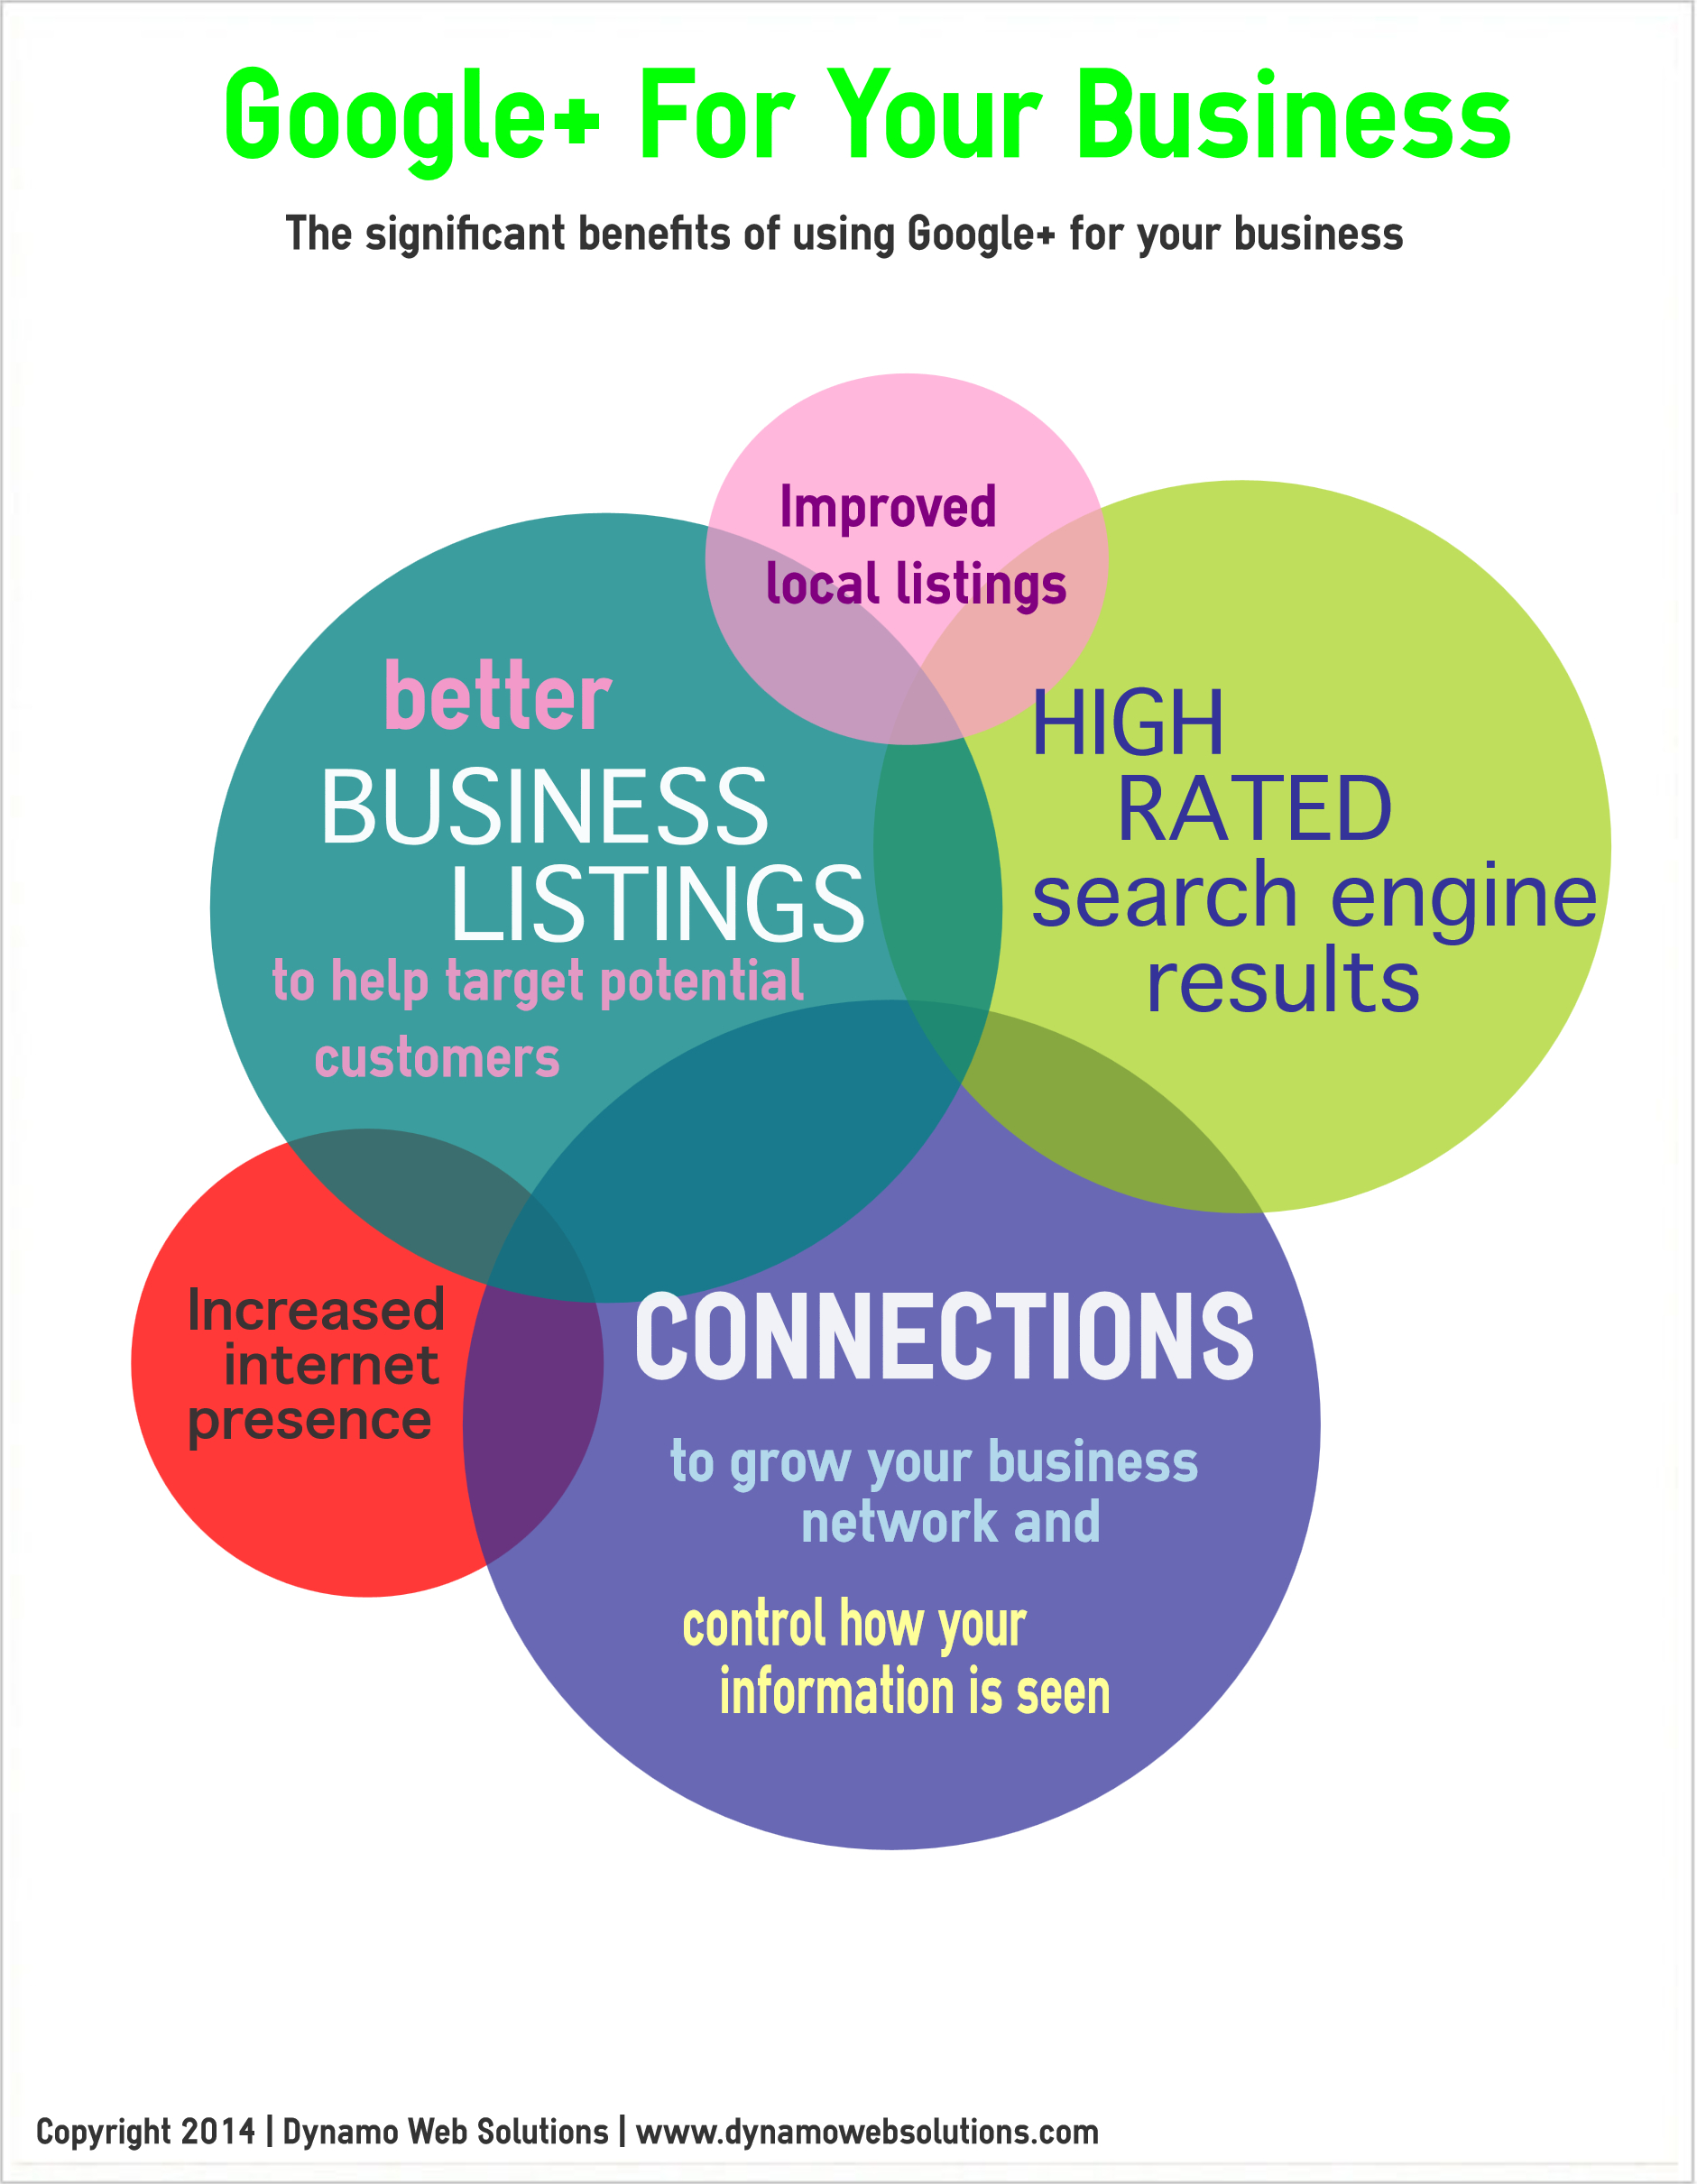 Google Plus Benefits for Business by Dynamo Web Solutions - Infographics